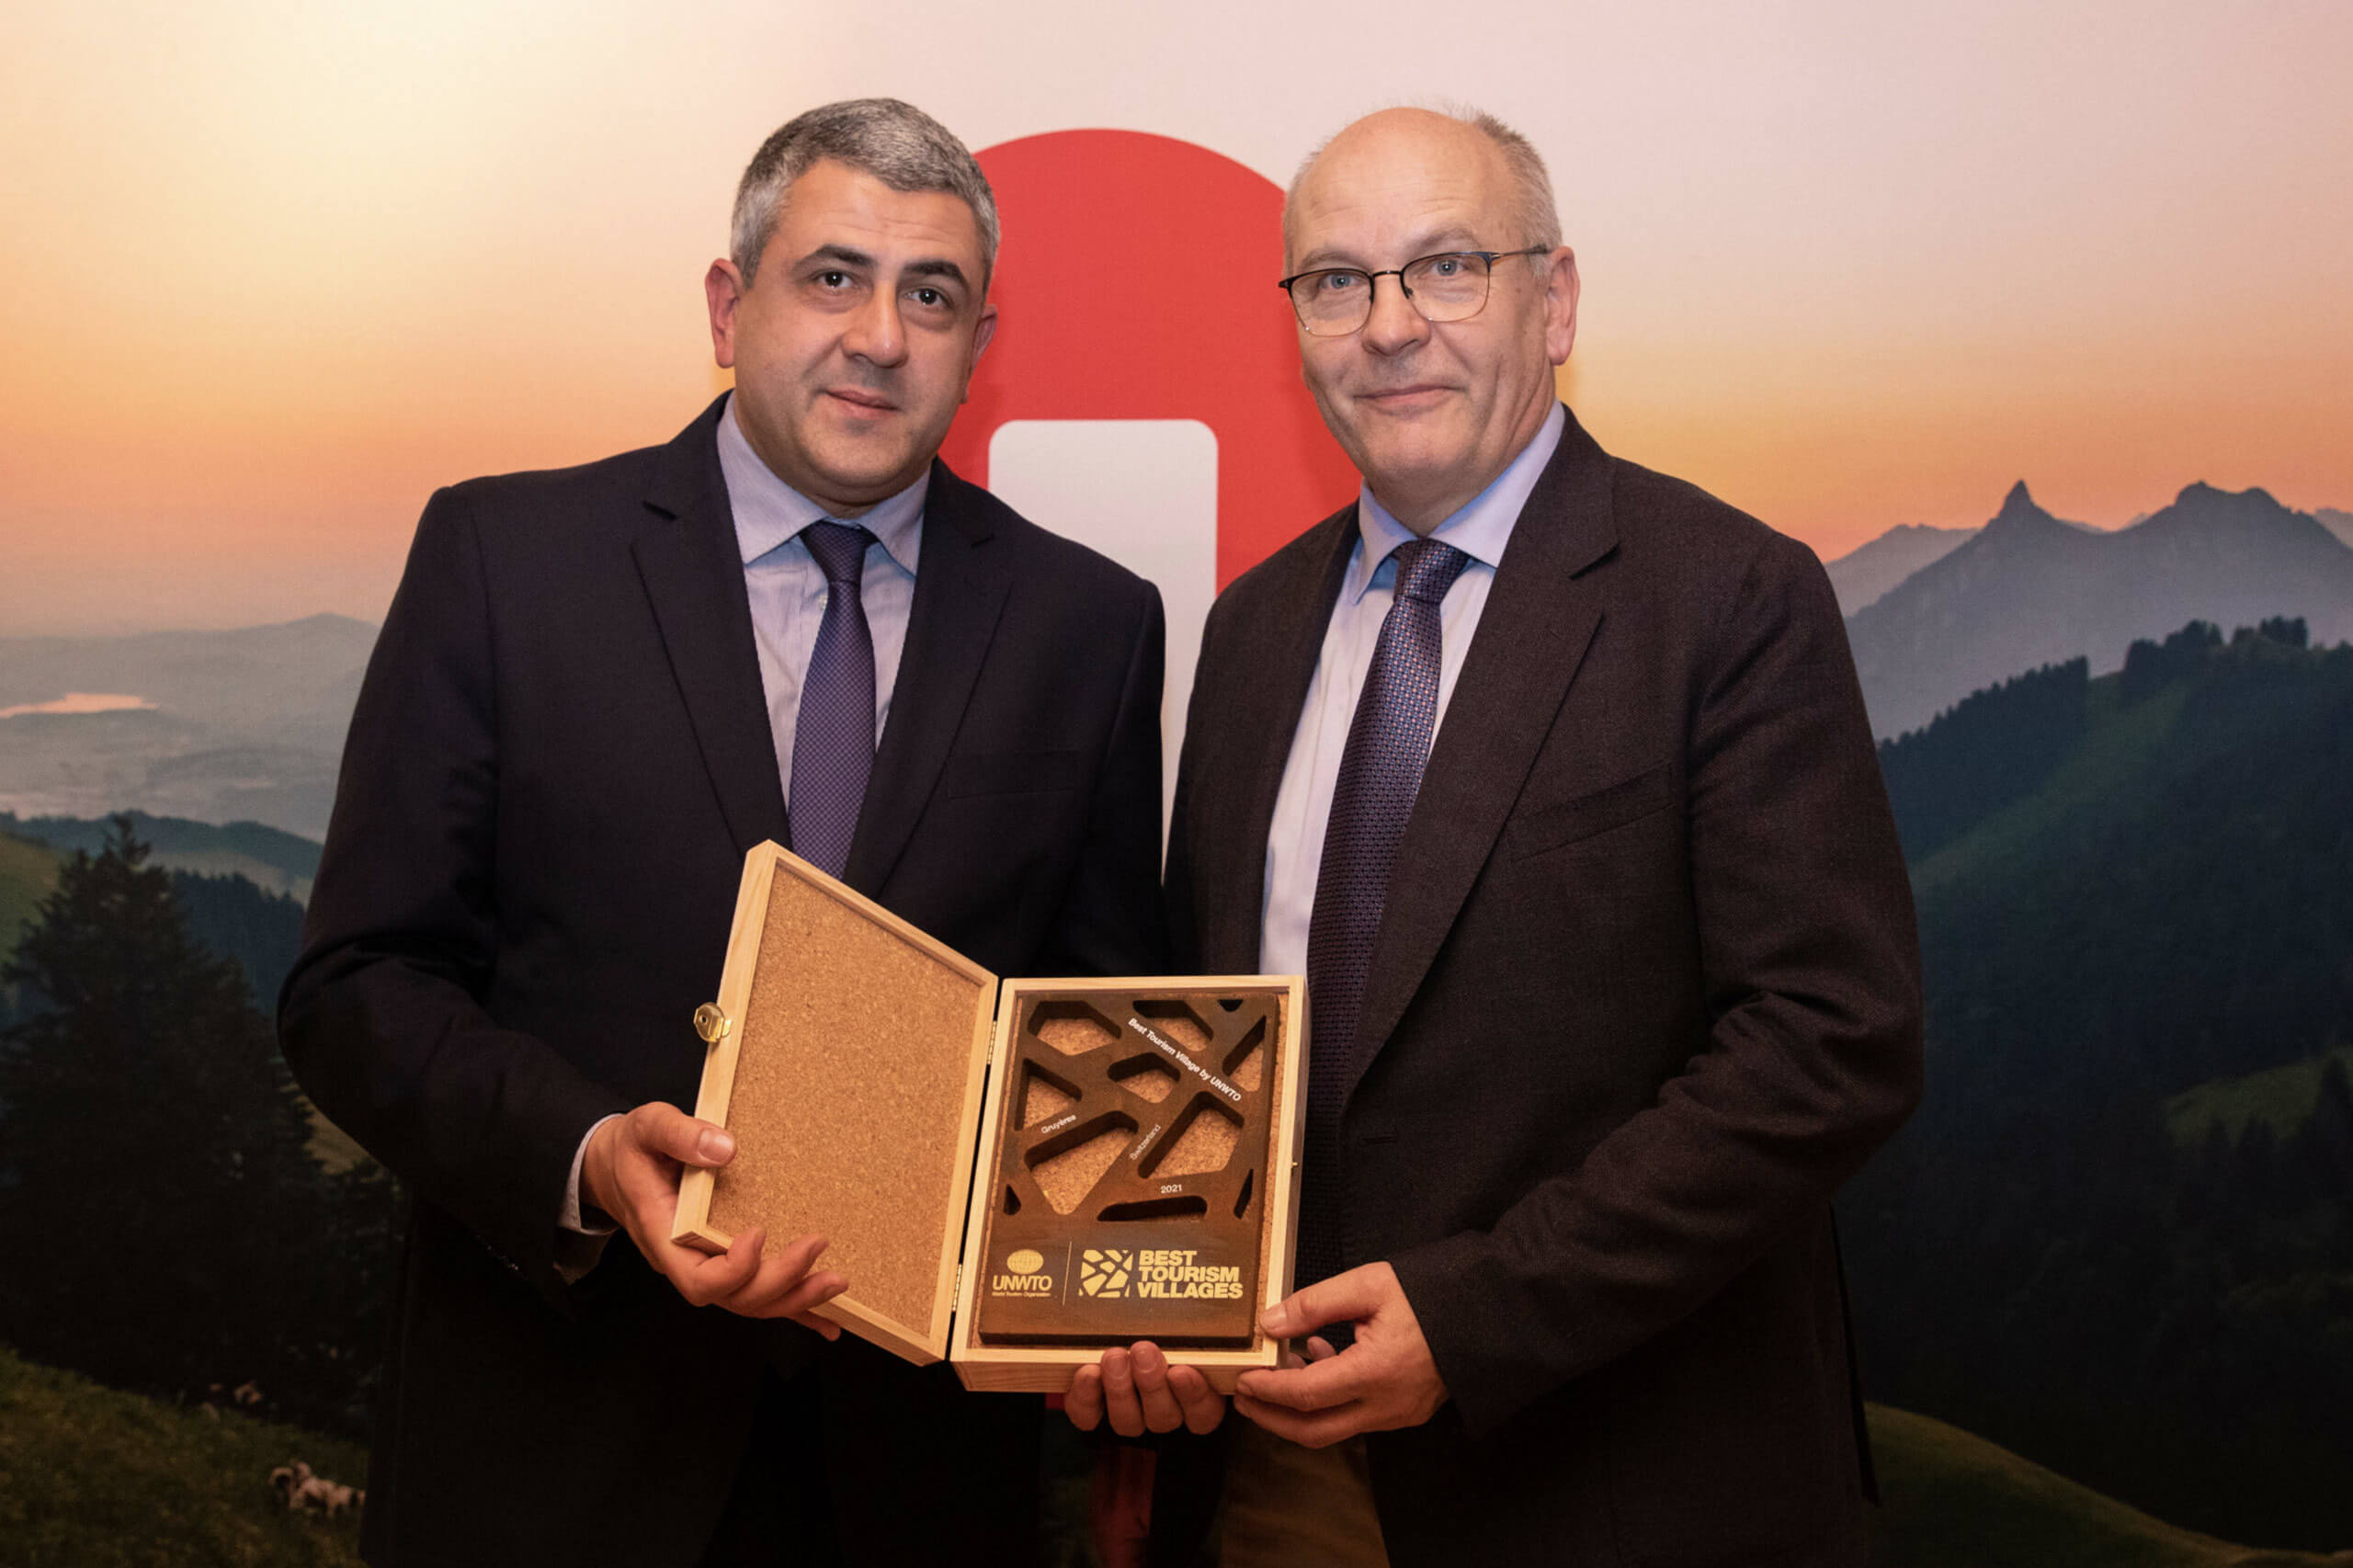 Secretary General with the mayor of Gruyères during his visit to the village on February 2022